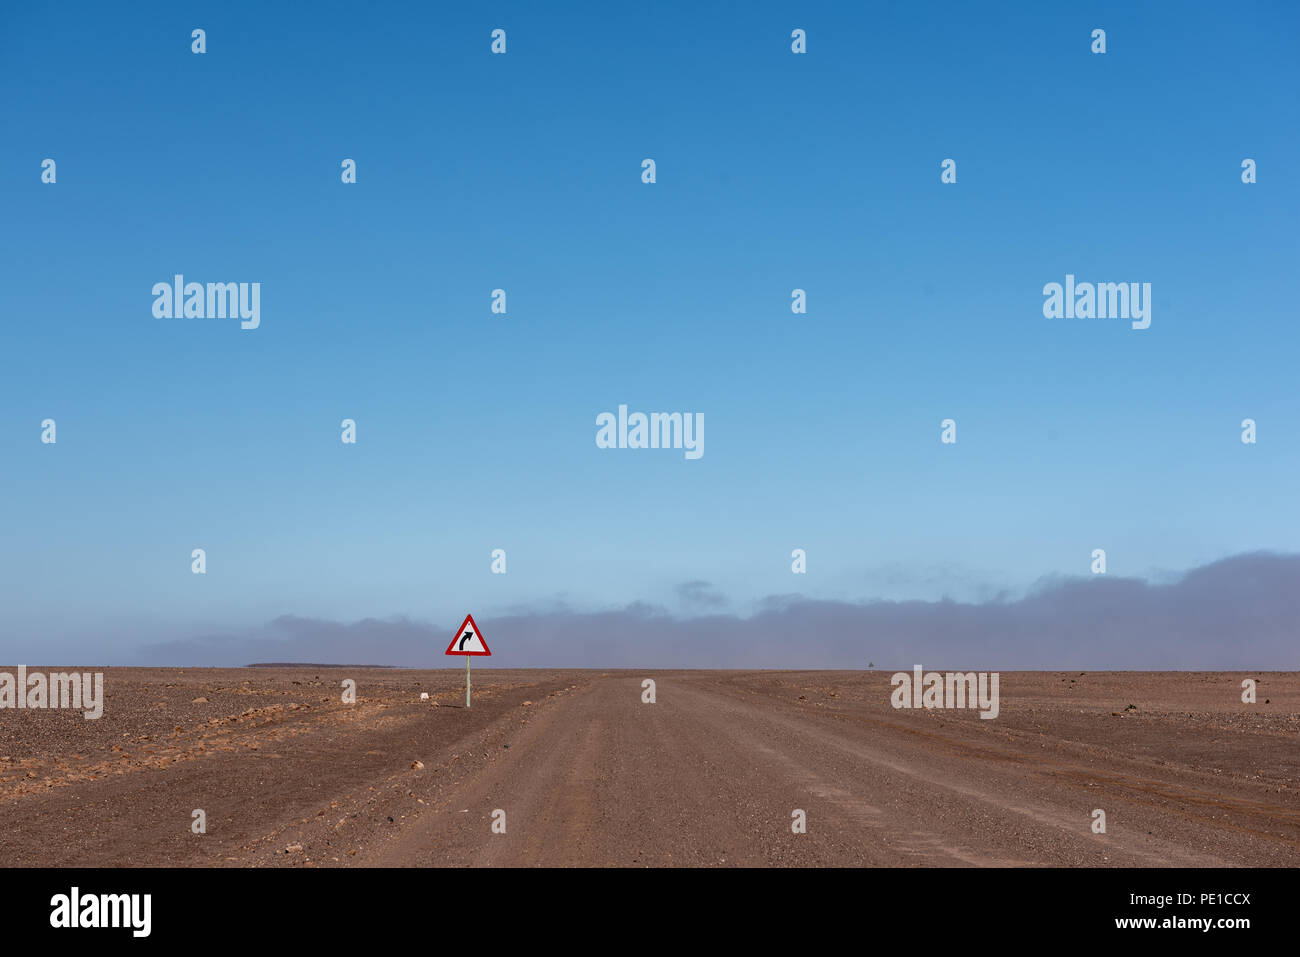 Bend street sign for curve with gravel road and blue sky Stock Photo